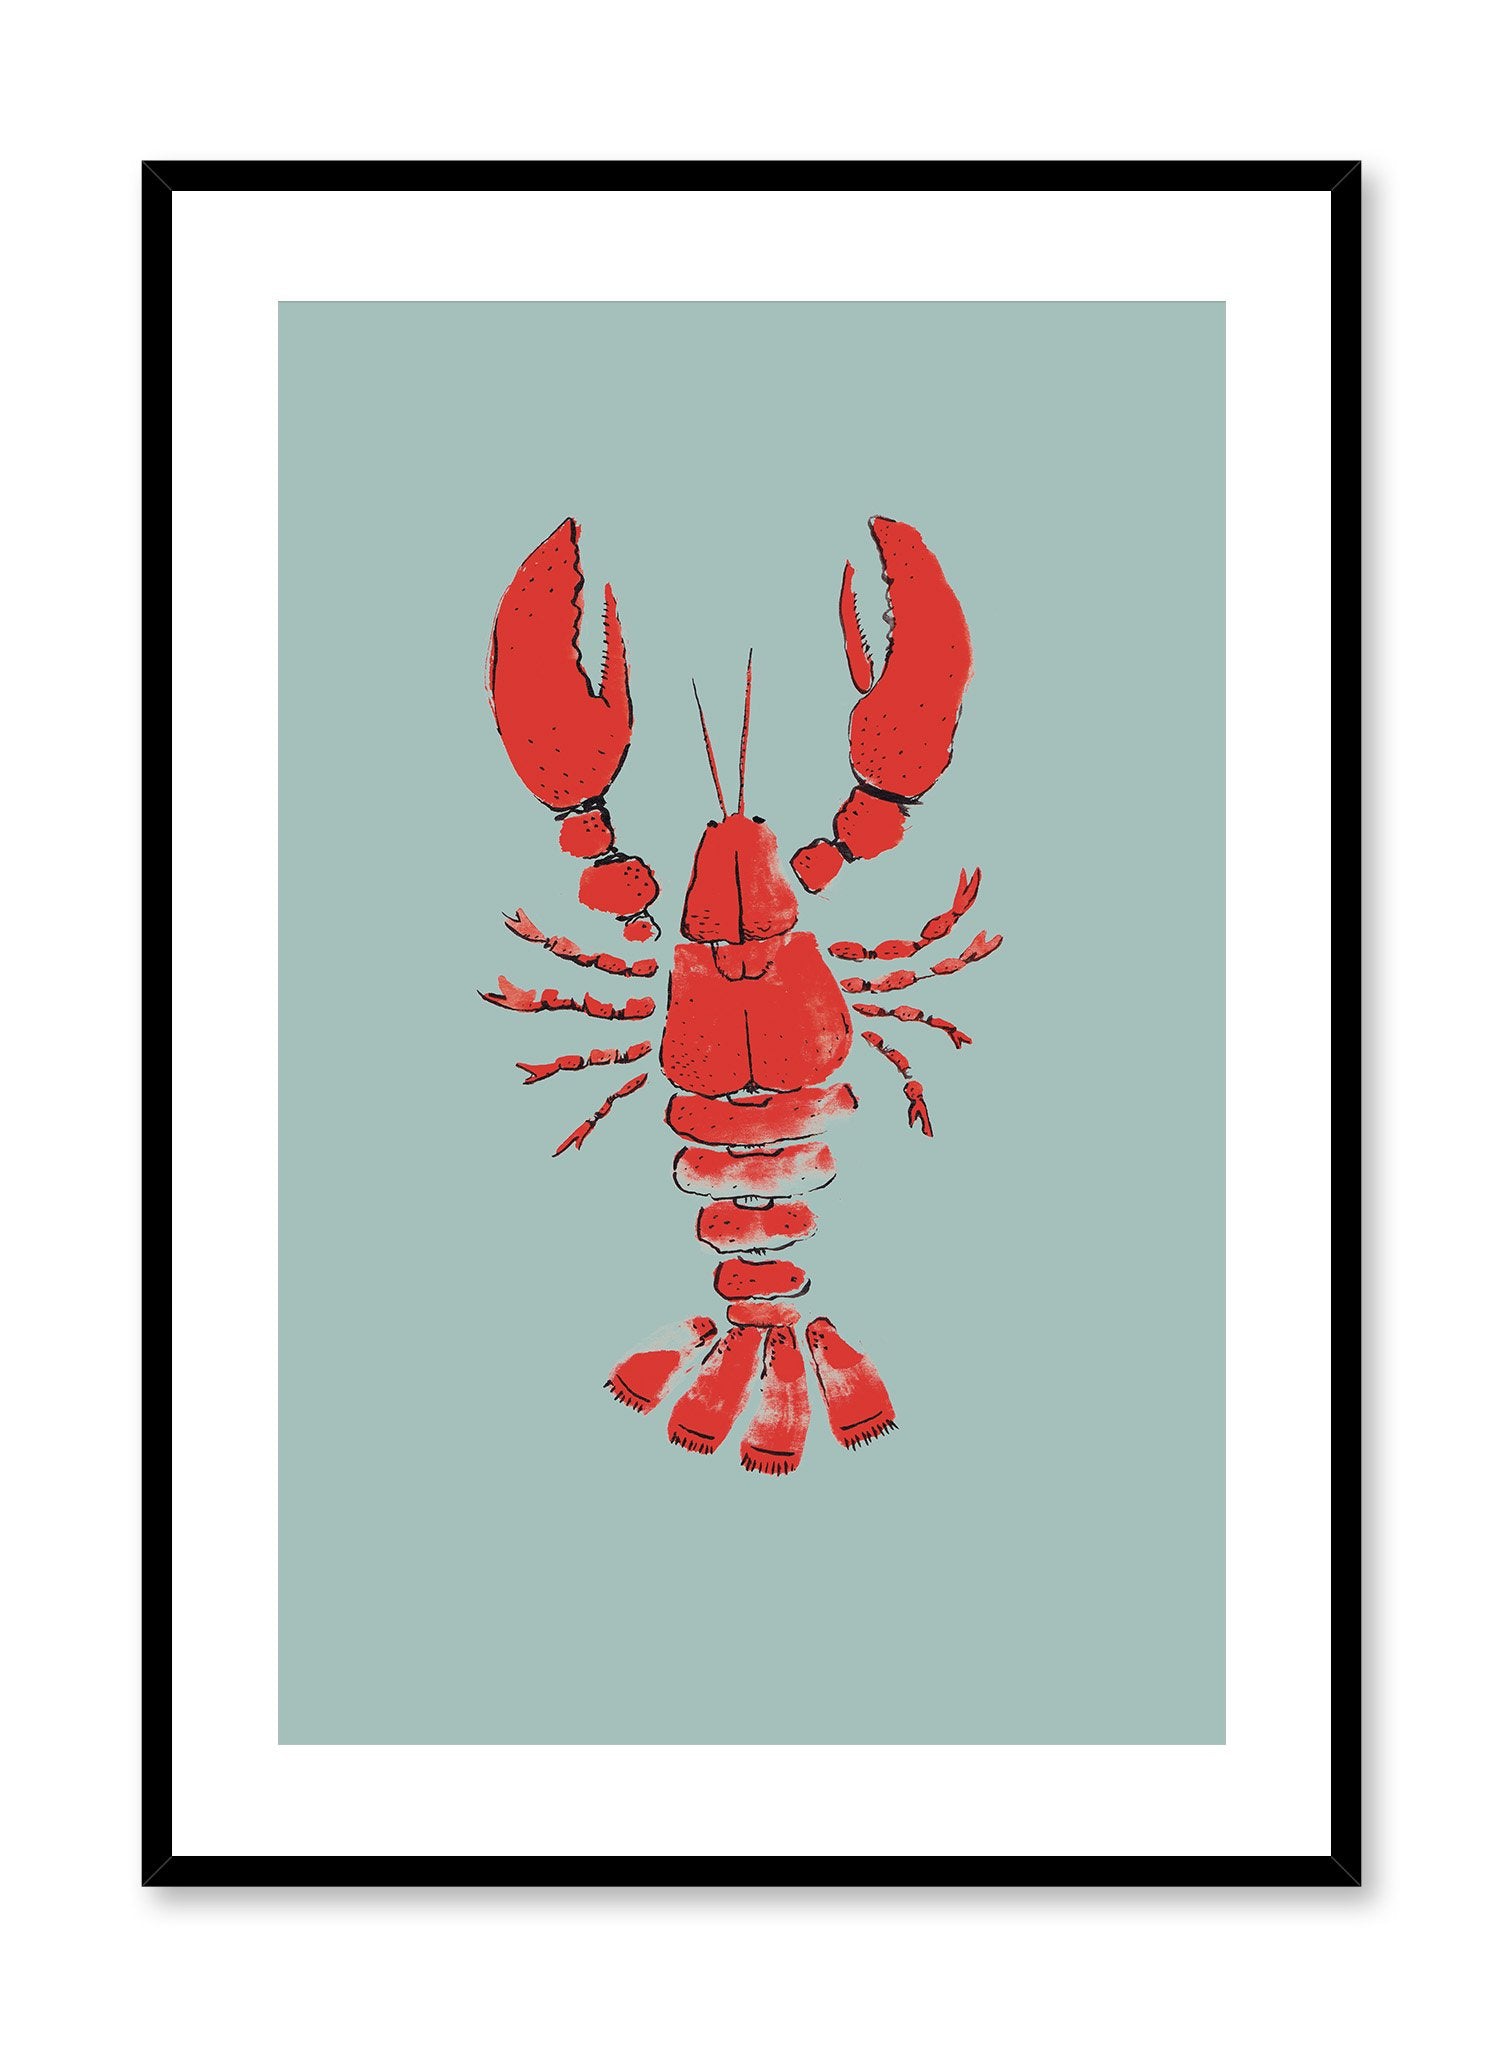 Hello Lobster is a minimalist illustration of a red lobster laid down to show all its creases by Opposite Wall.